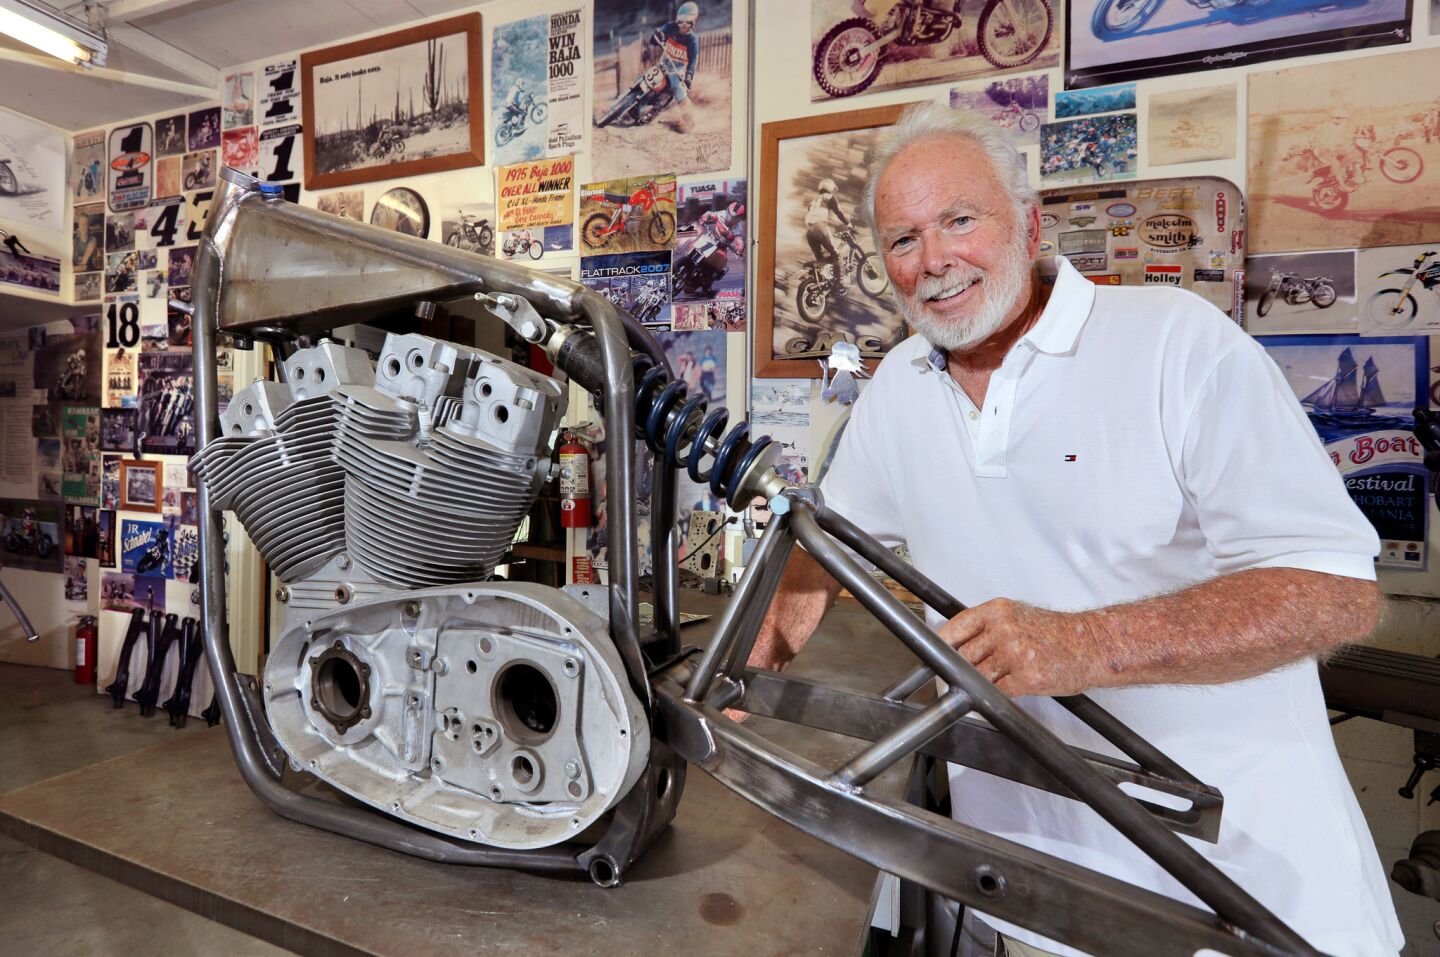 Motorcycle frame builder Jeff Cole, 76, in his home garage workshop with his Harley-Davidson XR750 frame design, a bike designed for dirt track racing featuring his mono-shock rear suspension.